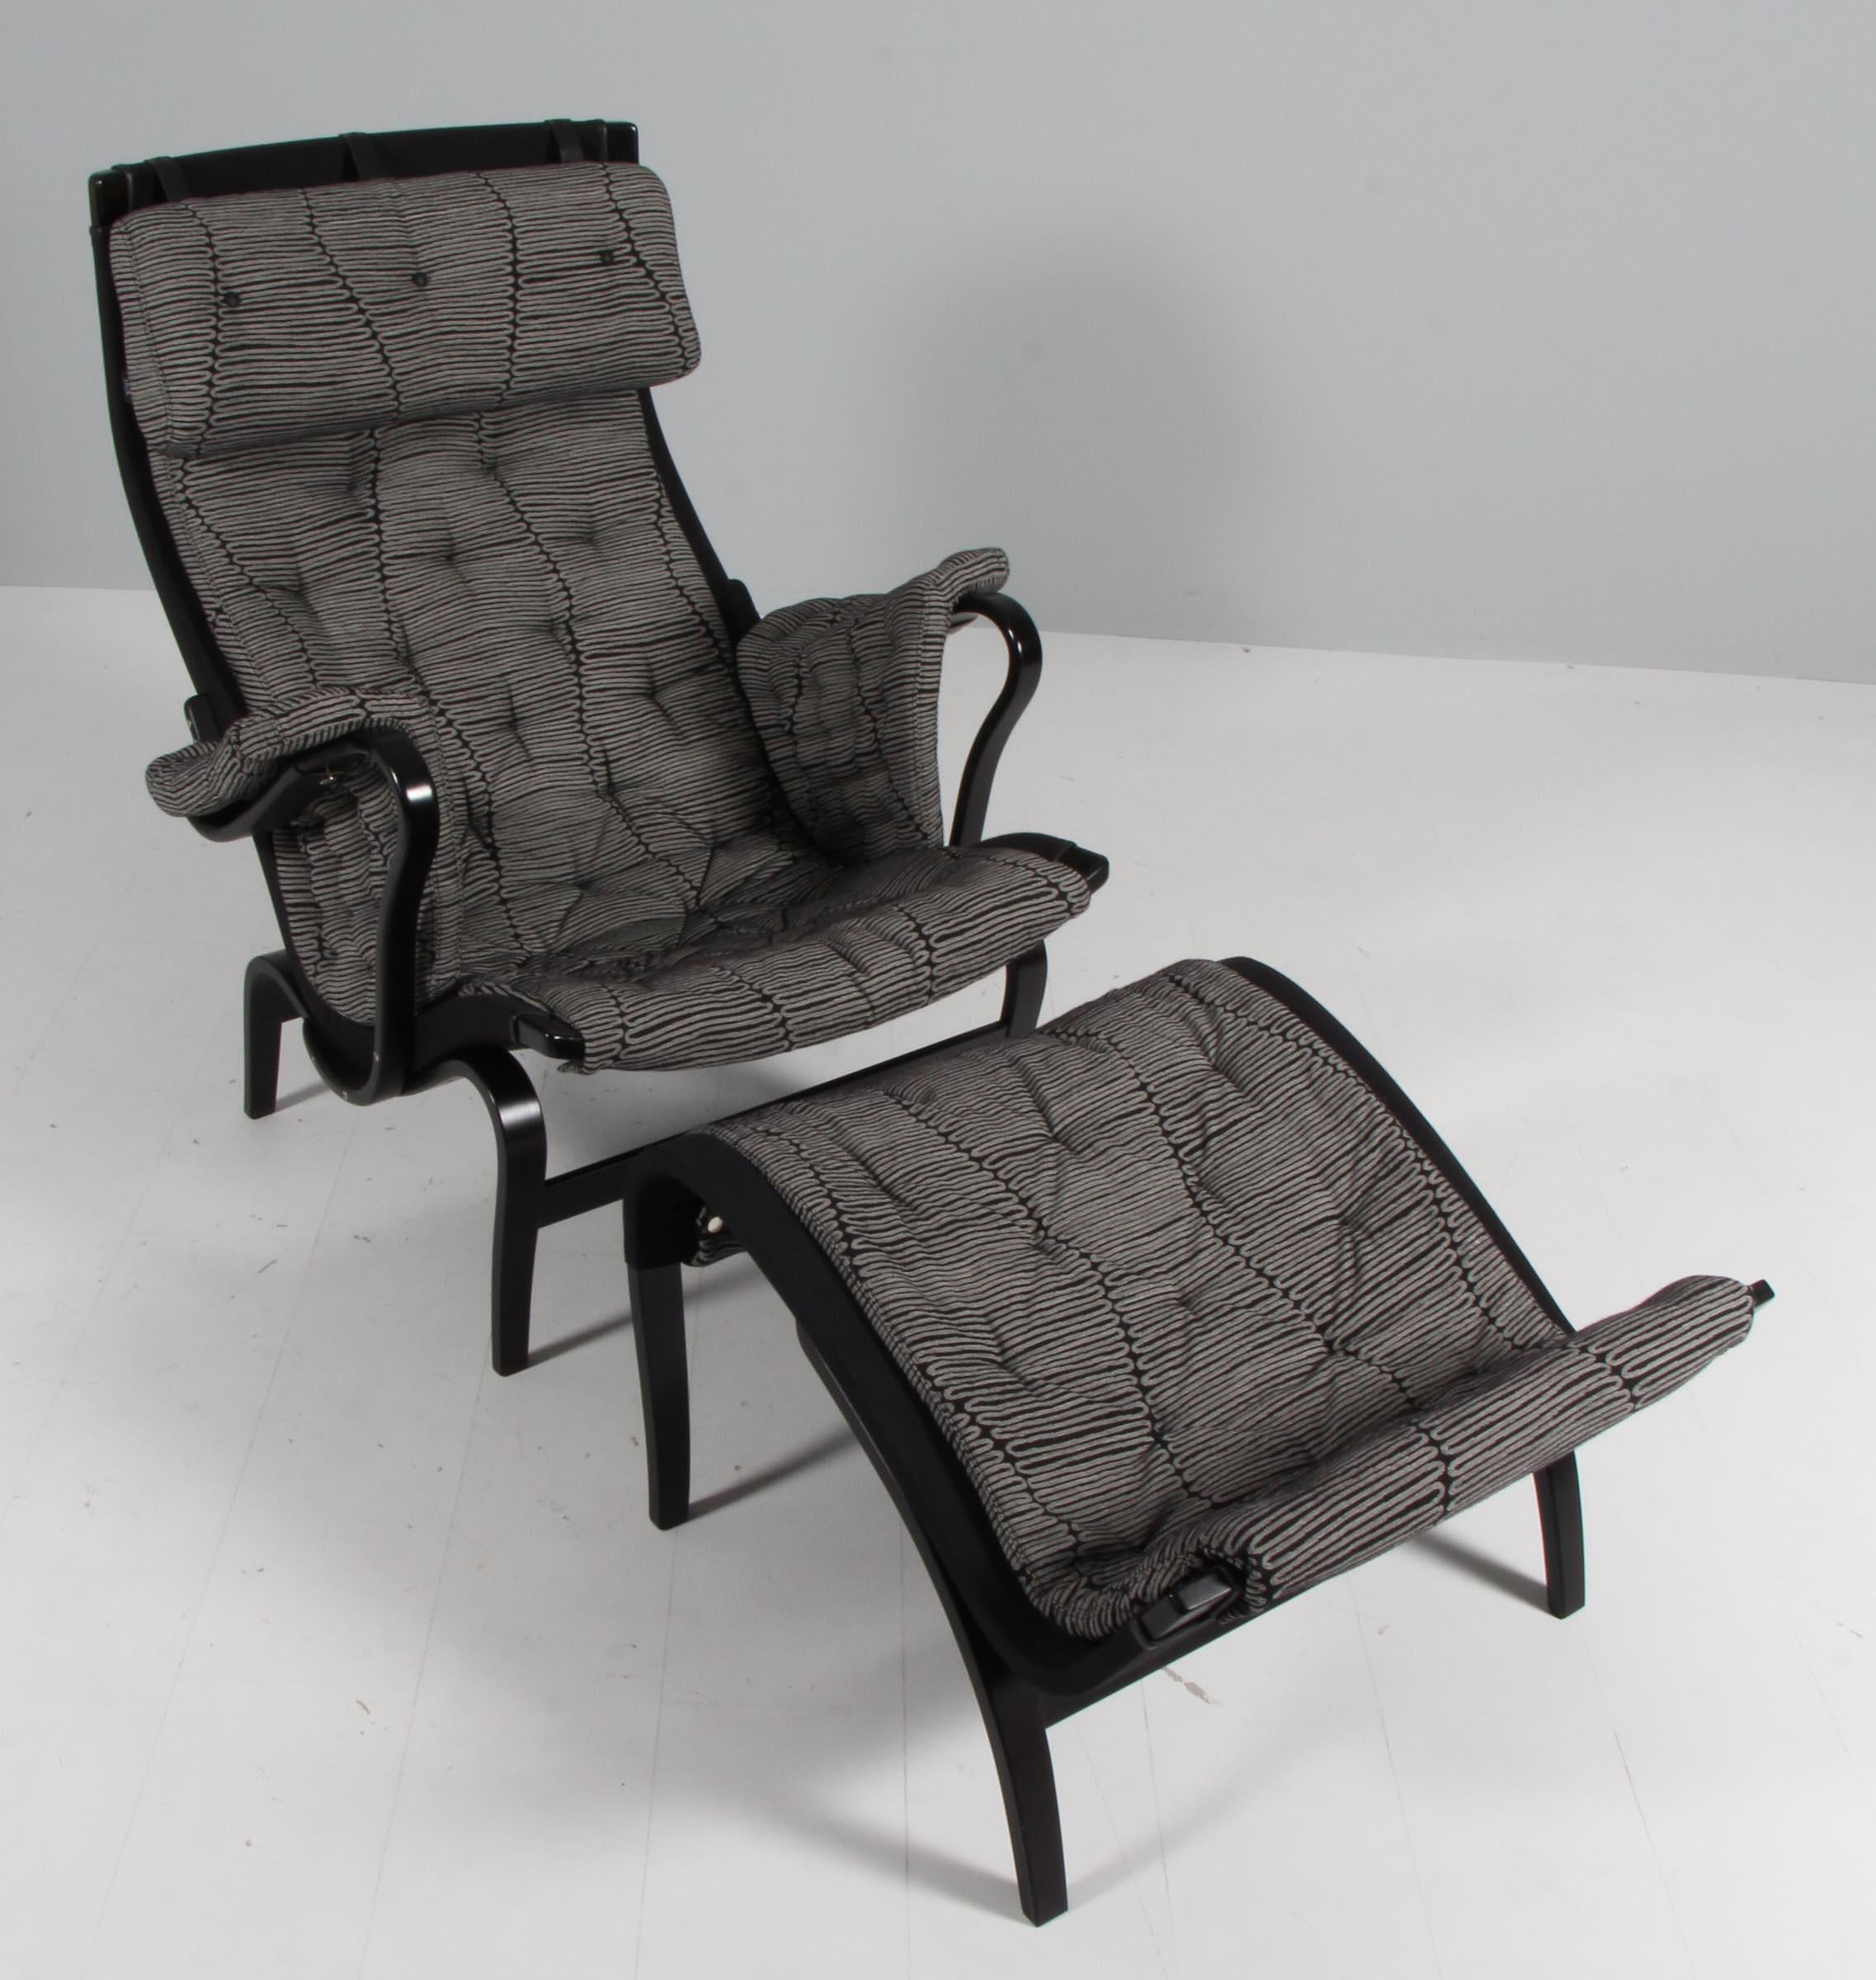 Bruno Mathsson Pernilla lounge chair with ottoman, original upholstery in fabric.

Frame in black lacquered beech.

Made by DUX.

This is a special editon celebrating Bruno Mathsson 100th birthday